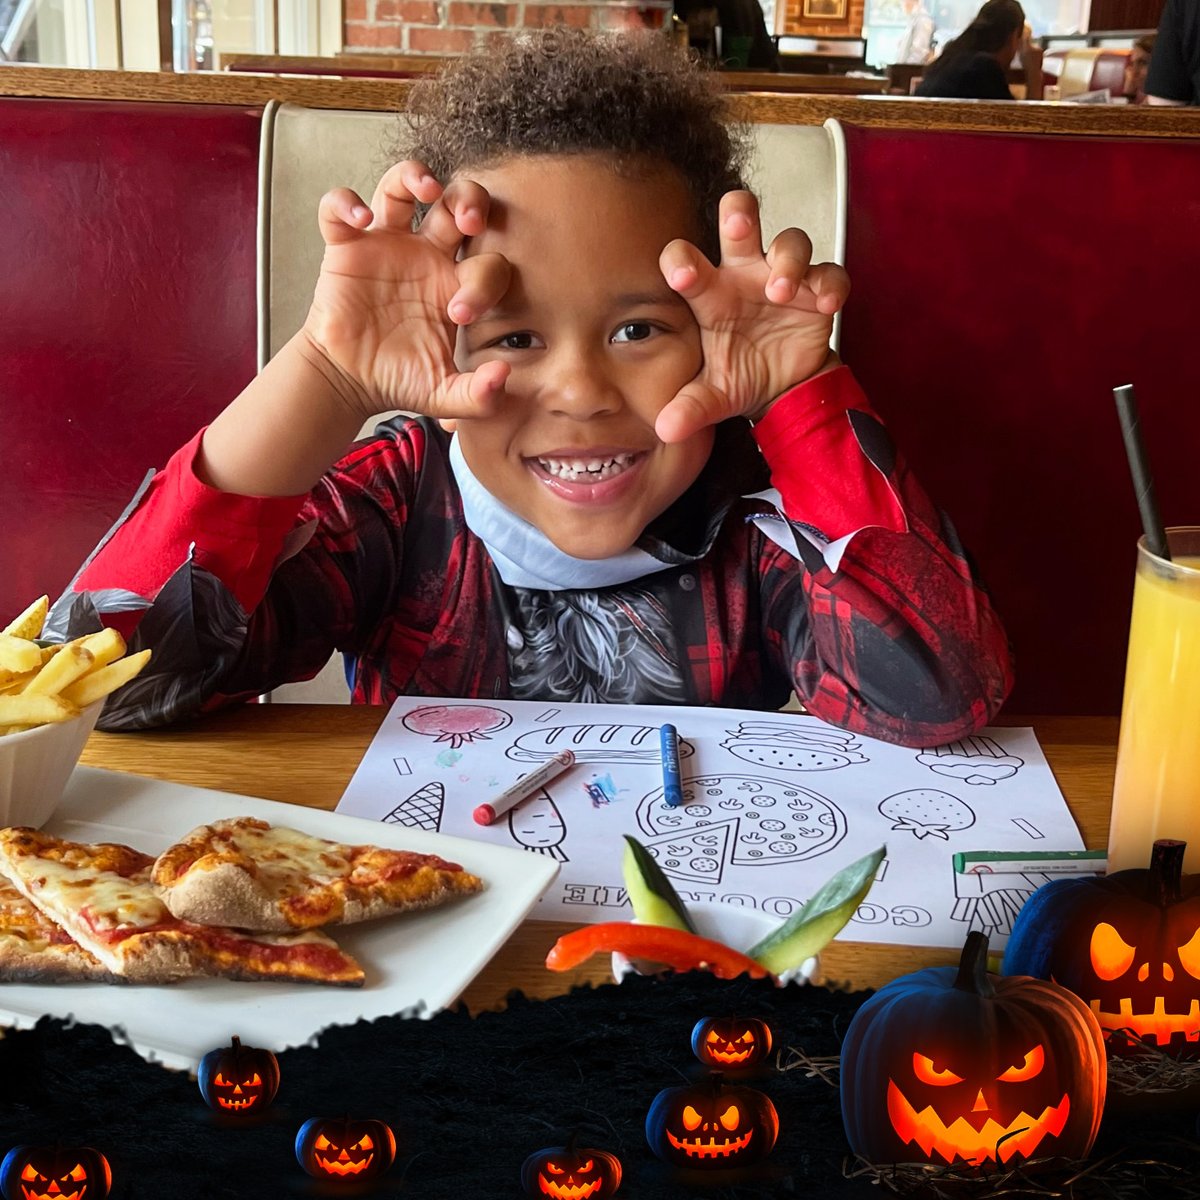 🧟 It's Spo0ky Season so eat, drink & be scary! 🧟 Kids, get in your best halloween costume & come down to @frankienbennys to have a meal... on us! 🎃 Kids Eat Free offer is live 25th - 30th Oct in England, Wales, NI & 27th - 31st Oct in Scotland. T&C's apply - see website.